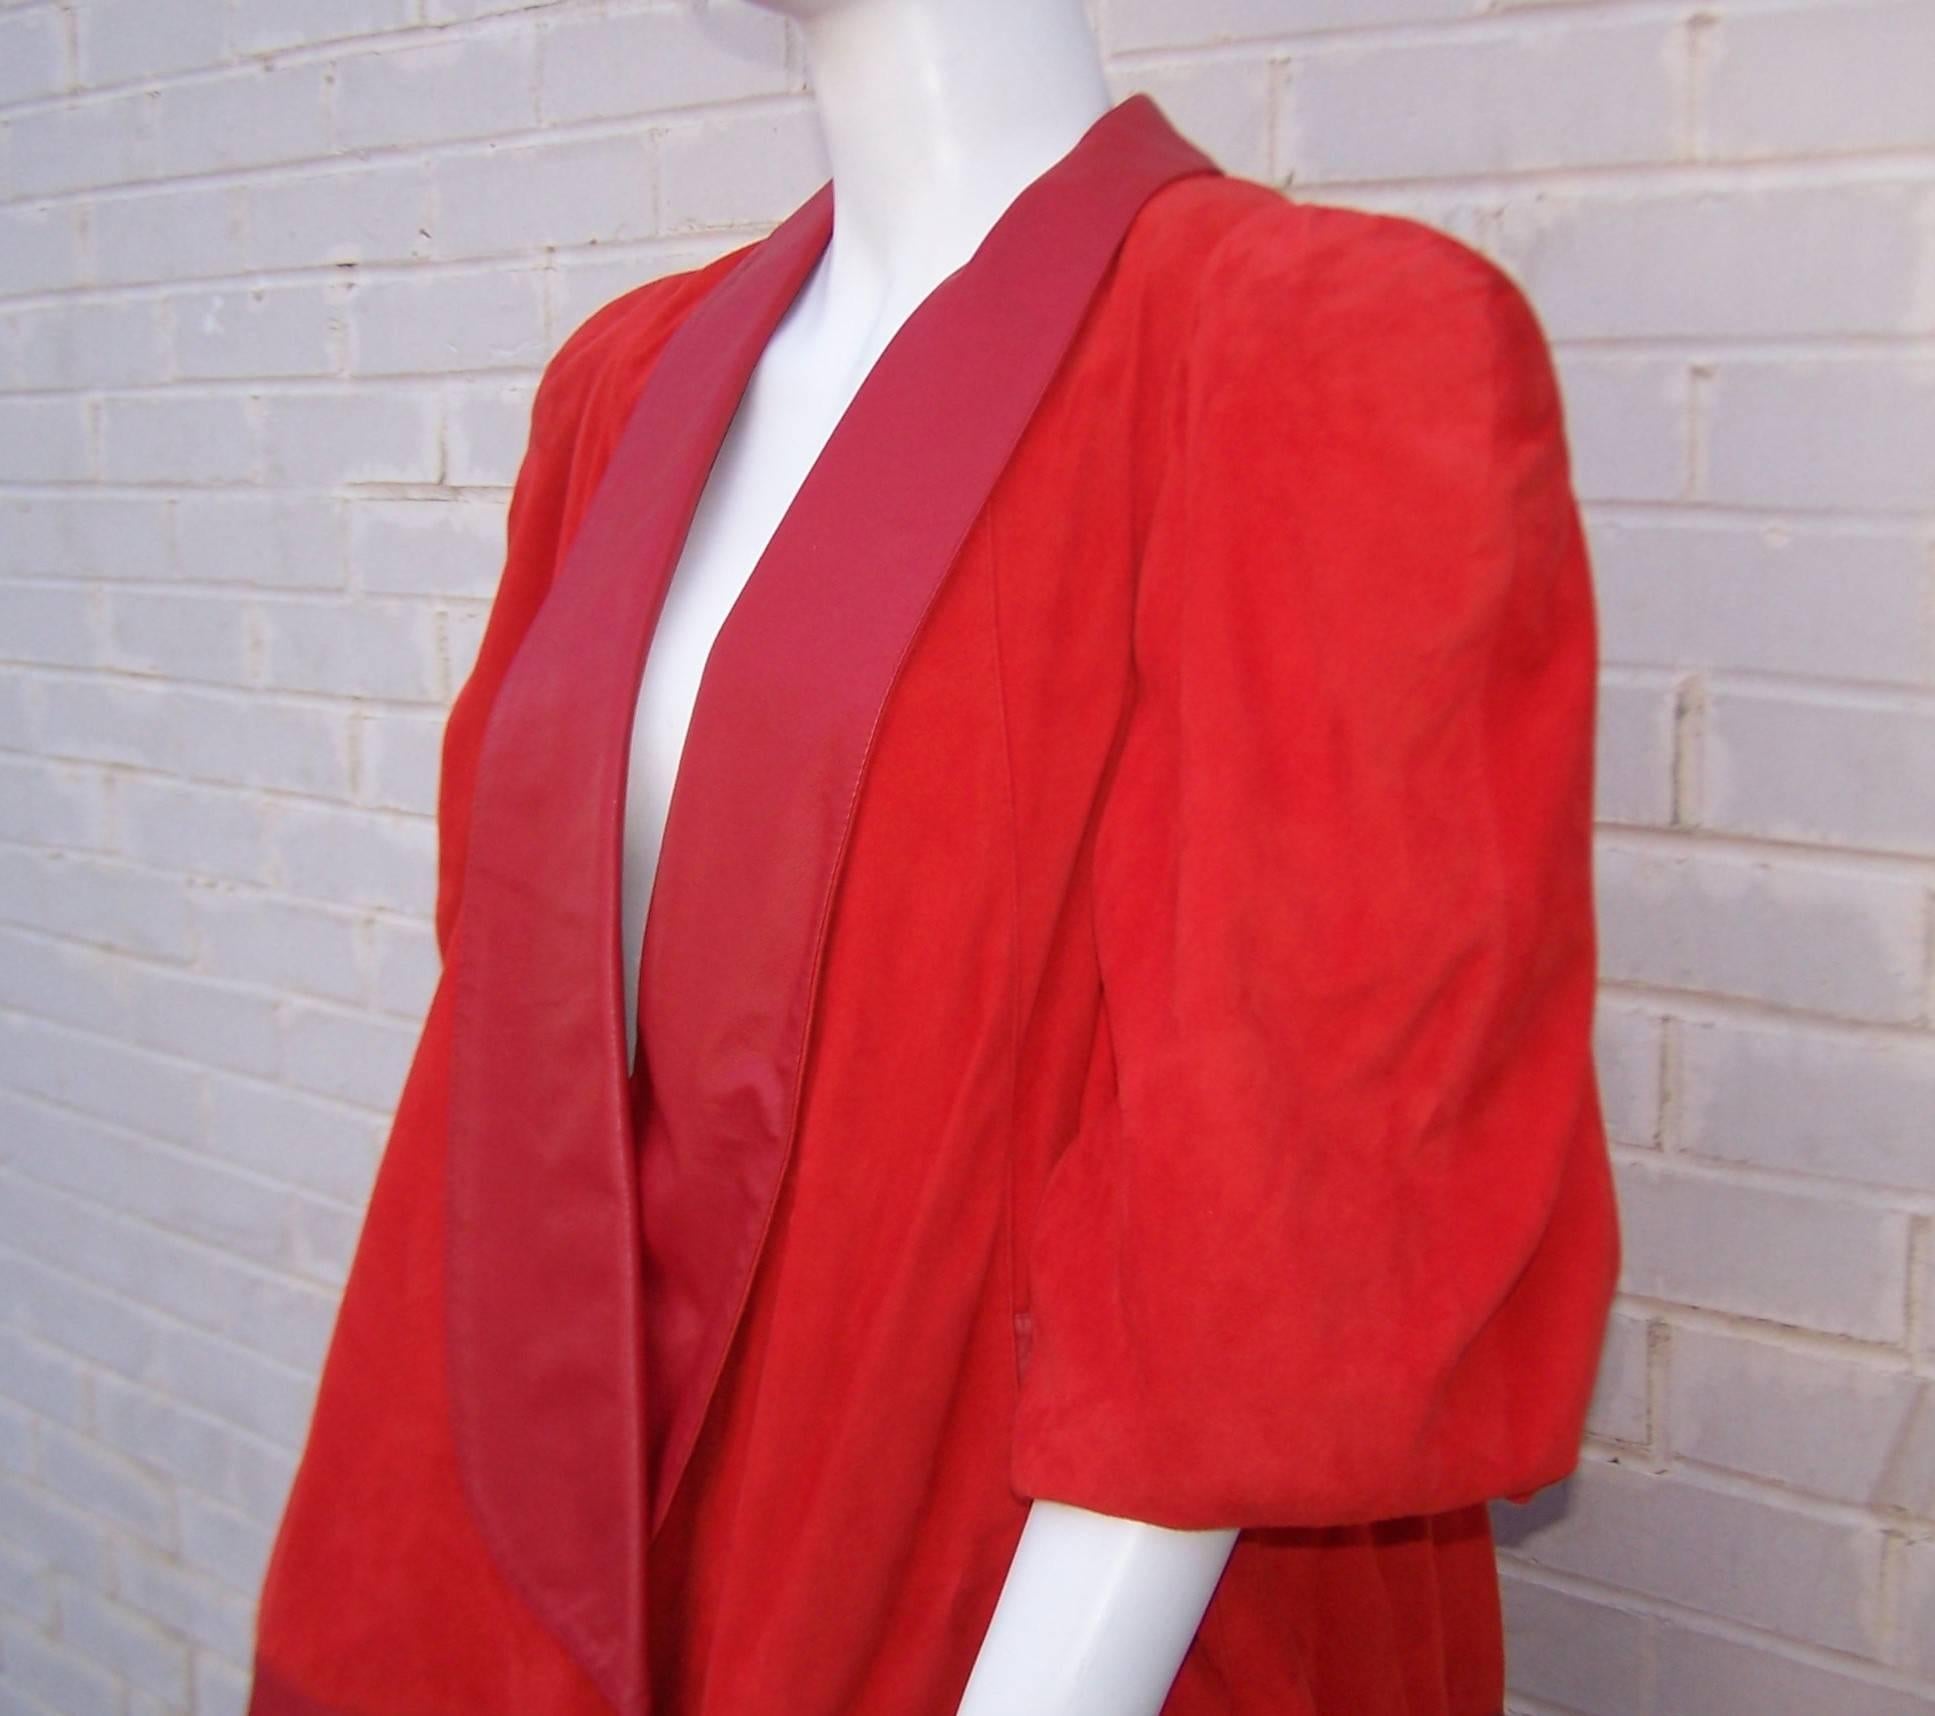 New Wave 1980's Lipstick Red Suede Leather Skirt Suit With Swing Jacket 1